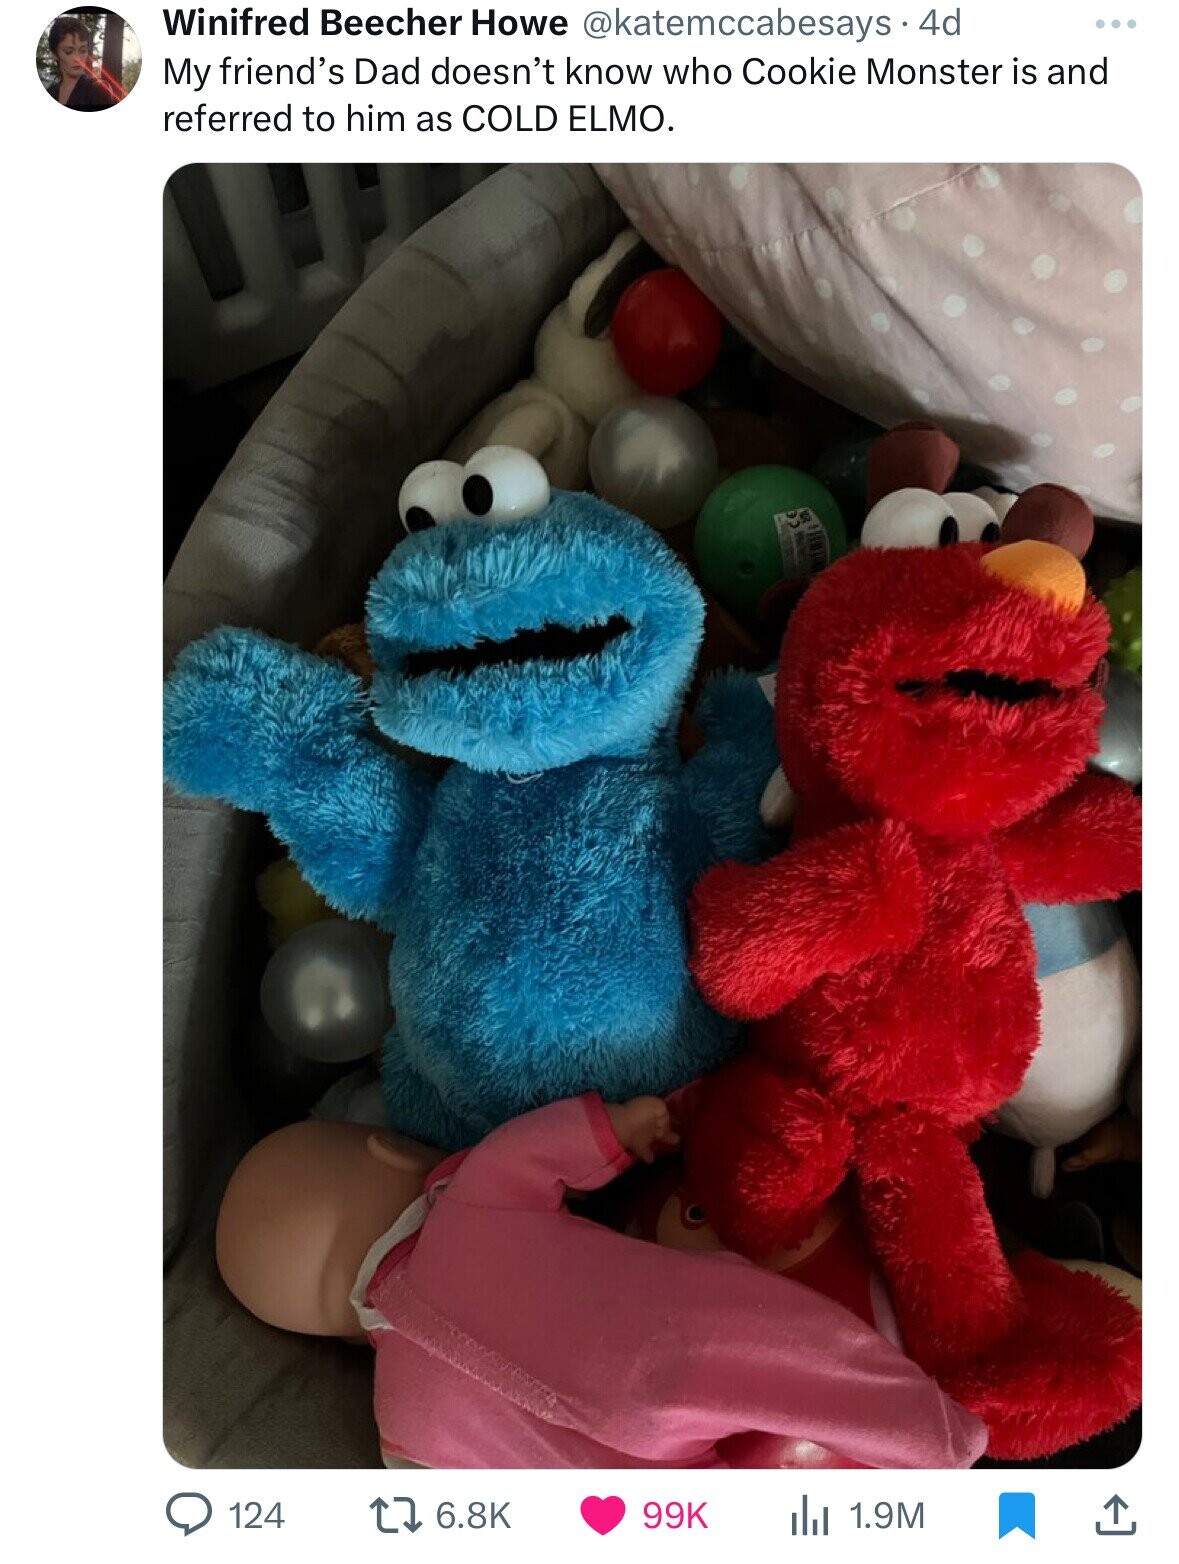 Toy - Winifred Beecher Howe 4d My friend's Dad doesn't know who Cookie Monster is and referred to him as Cold Elmo. 124 99K 1.9M